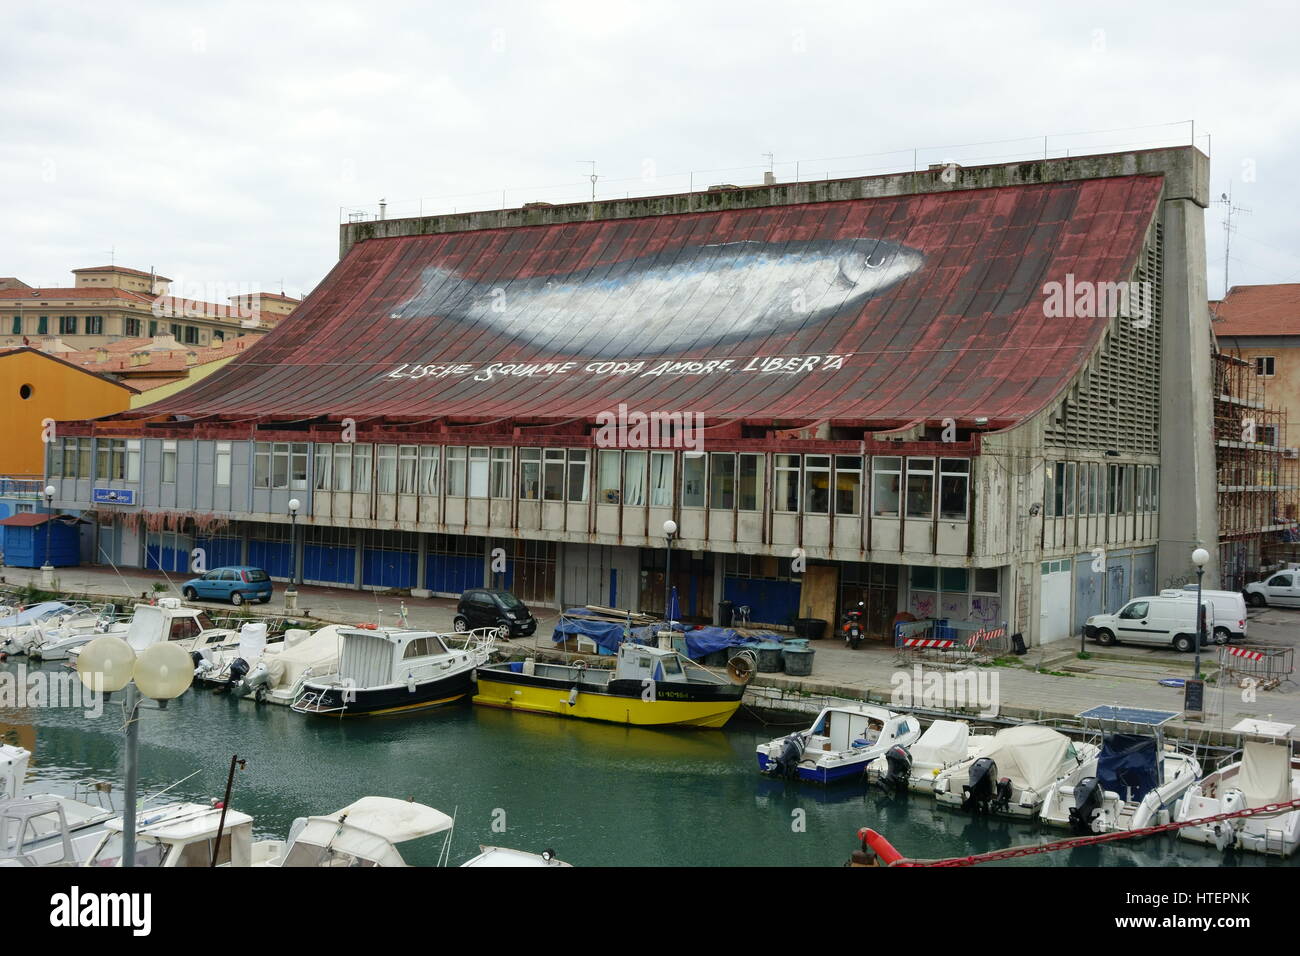 Lische Squame Coda. Amore - The huge sardine mural painting on the roof -  Old industrial fish market legal graffiti - Livorno, Tuscany, Italy, Europe  Stock Photo - Alamy